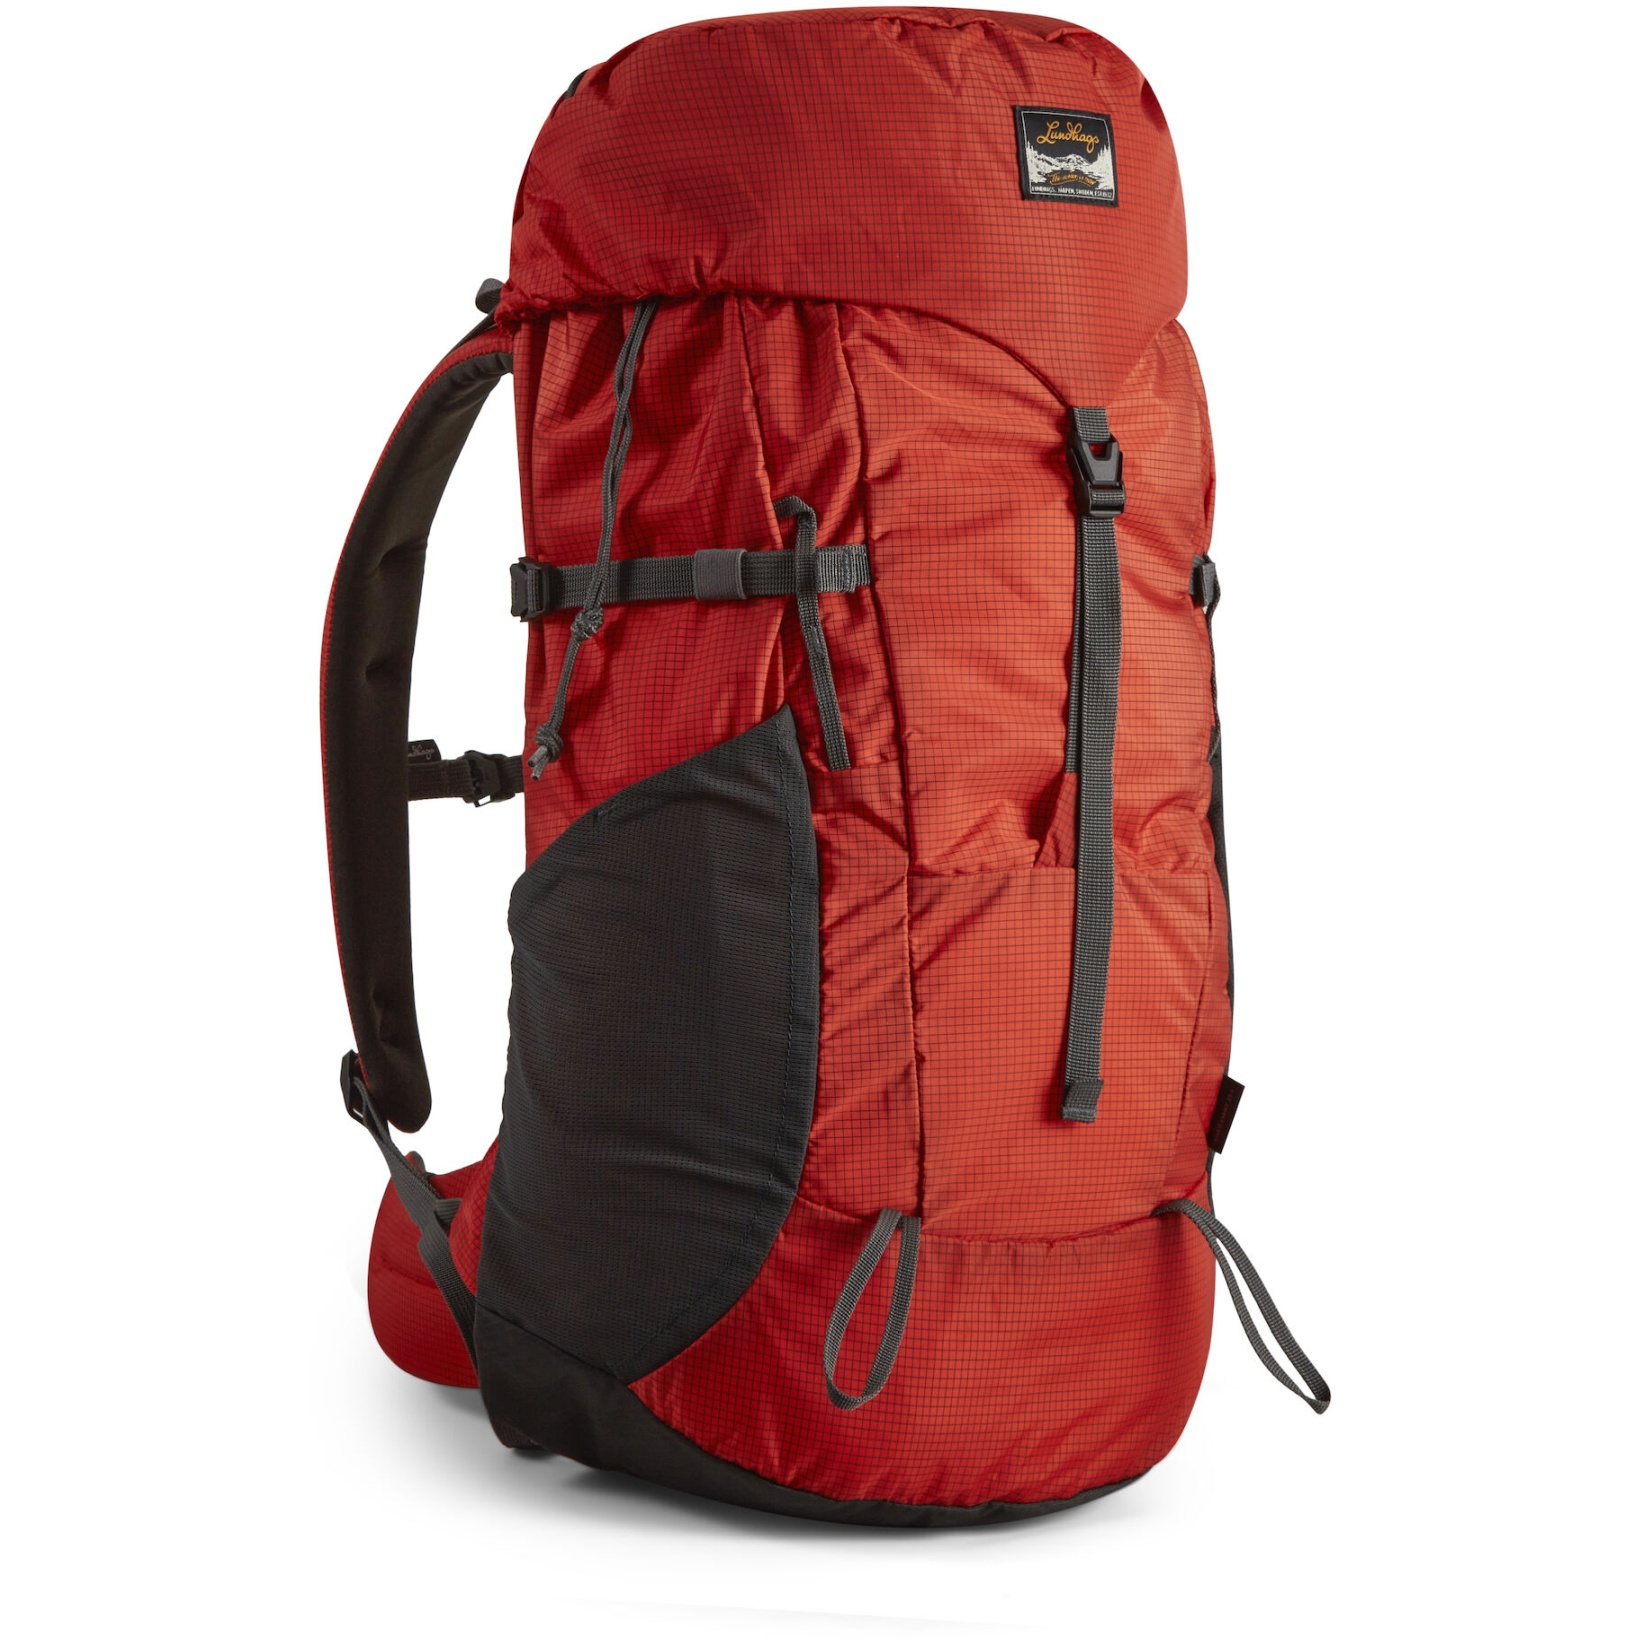 Picture of Lundhags Tived Light 25L Backpack - Lively Red 250